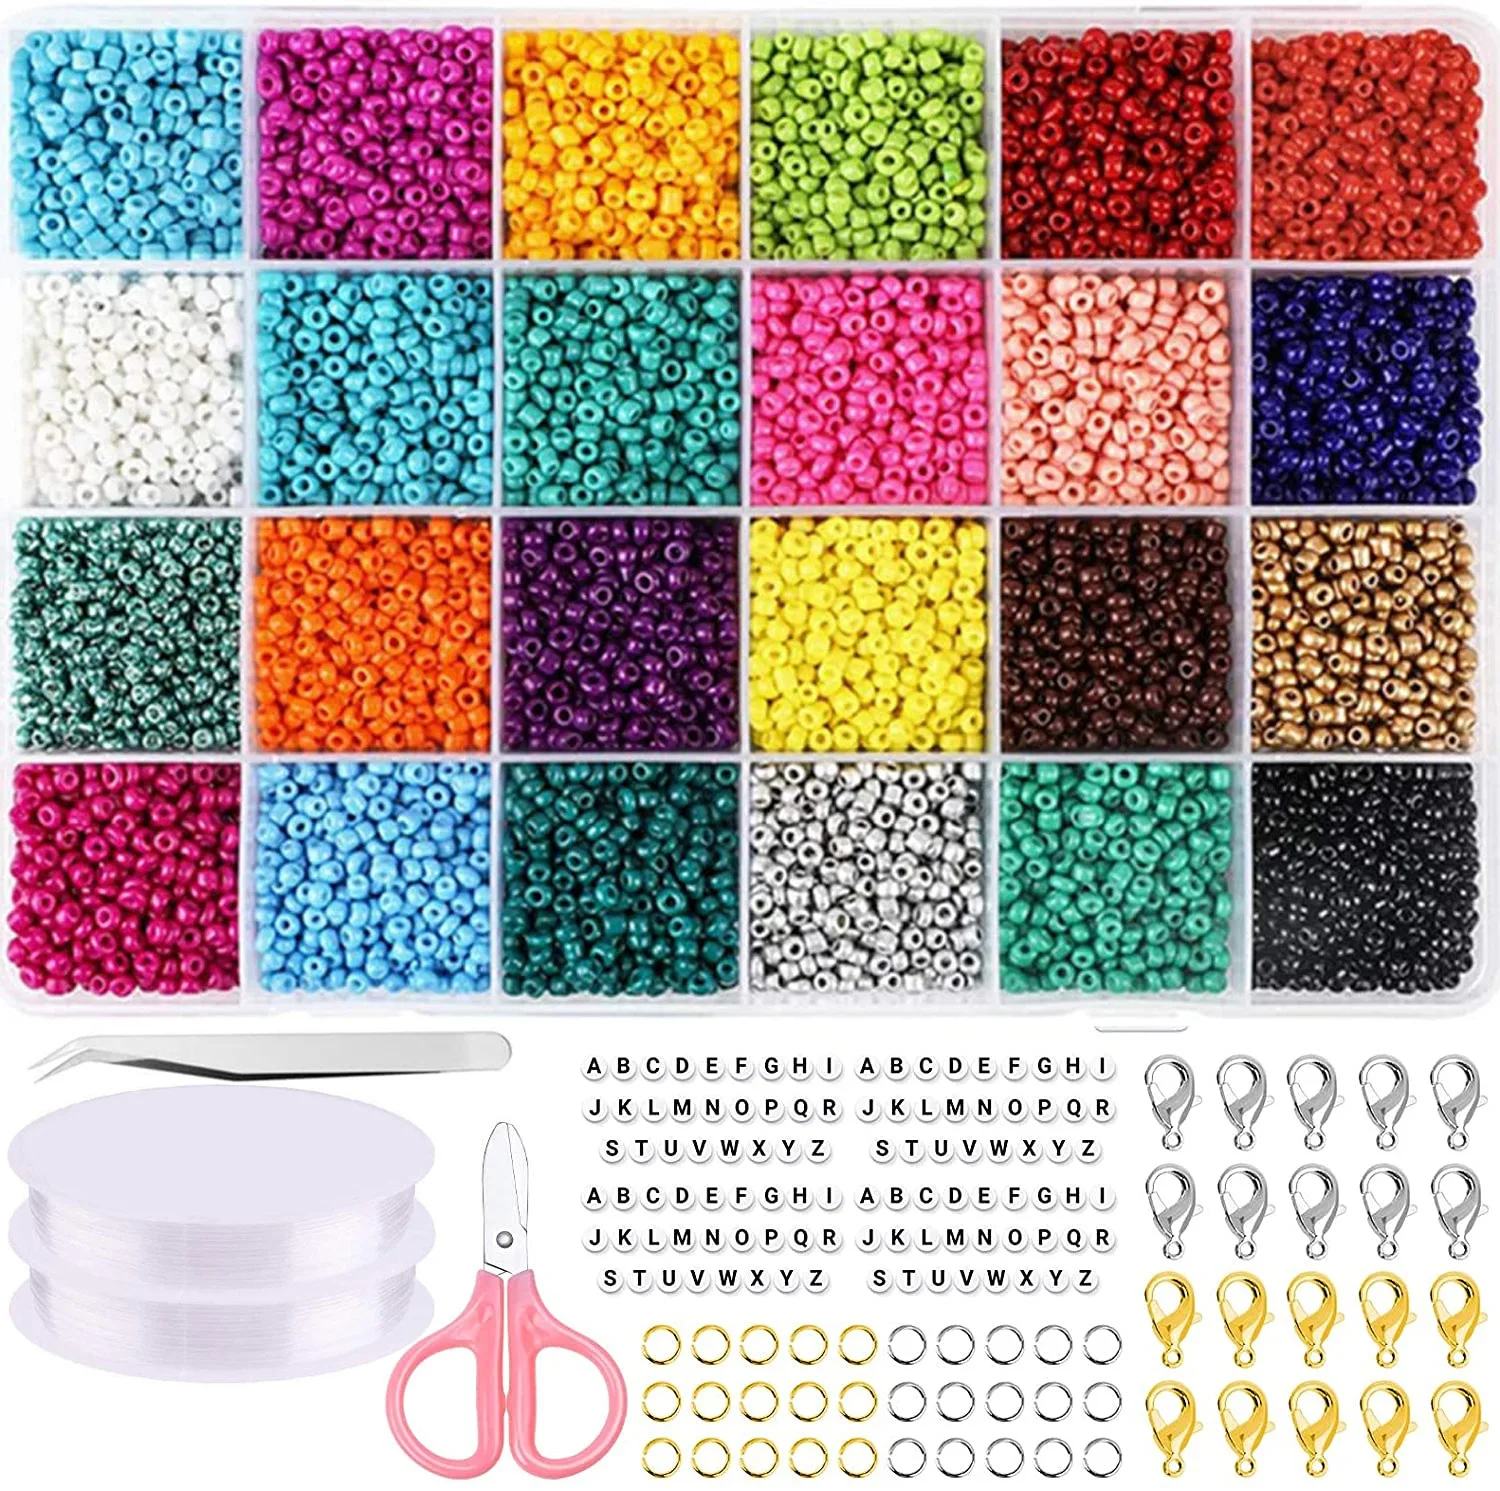 

9600Pcs Flat Round Plastic Letter Beads Boxes For DIY Name Bracelets Jewelry Making Craft Glass Seed English Alphabet Bead Kits